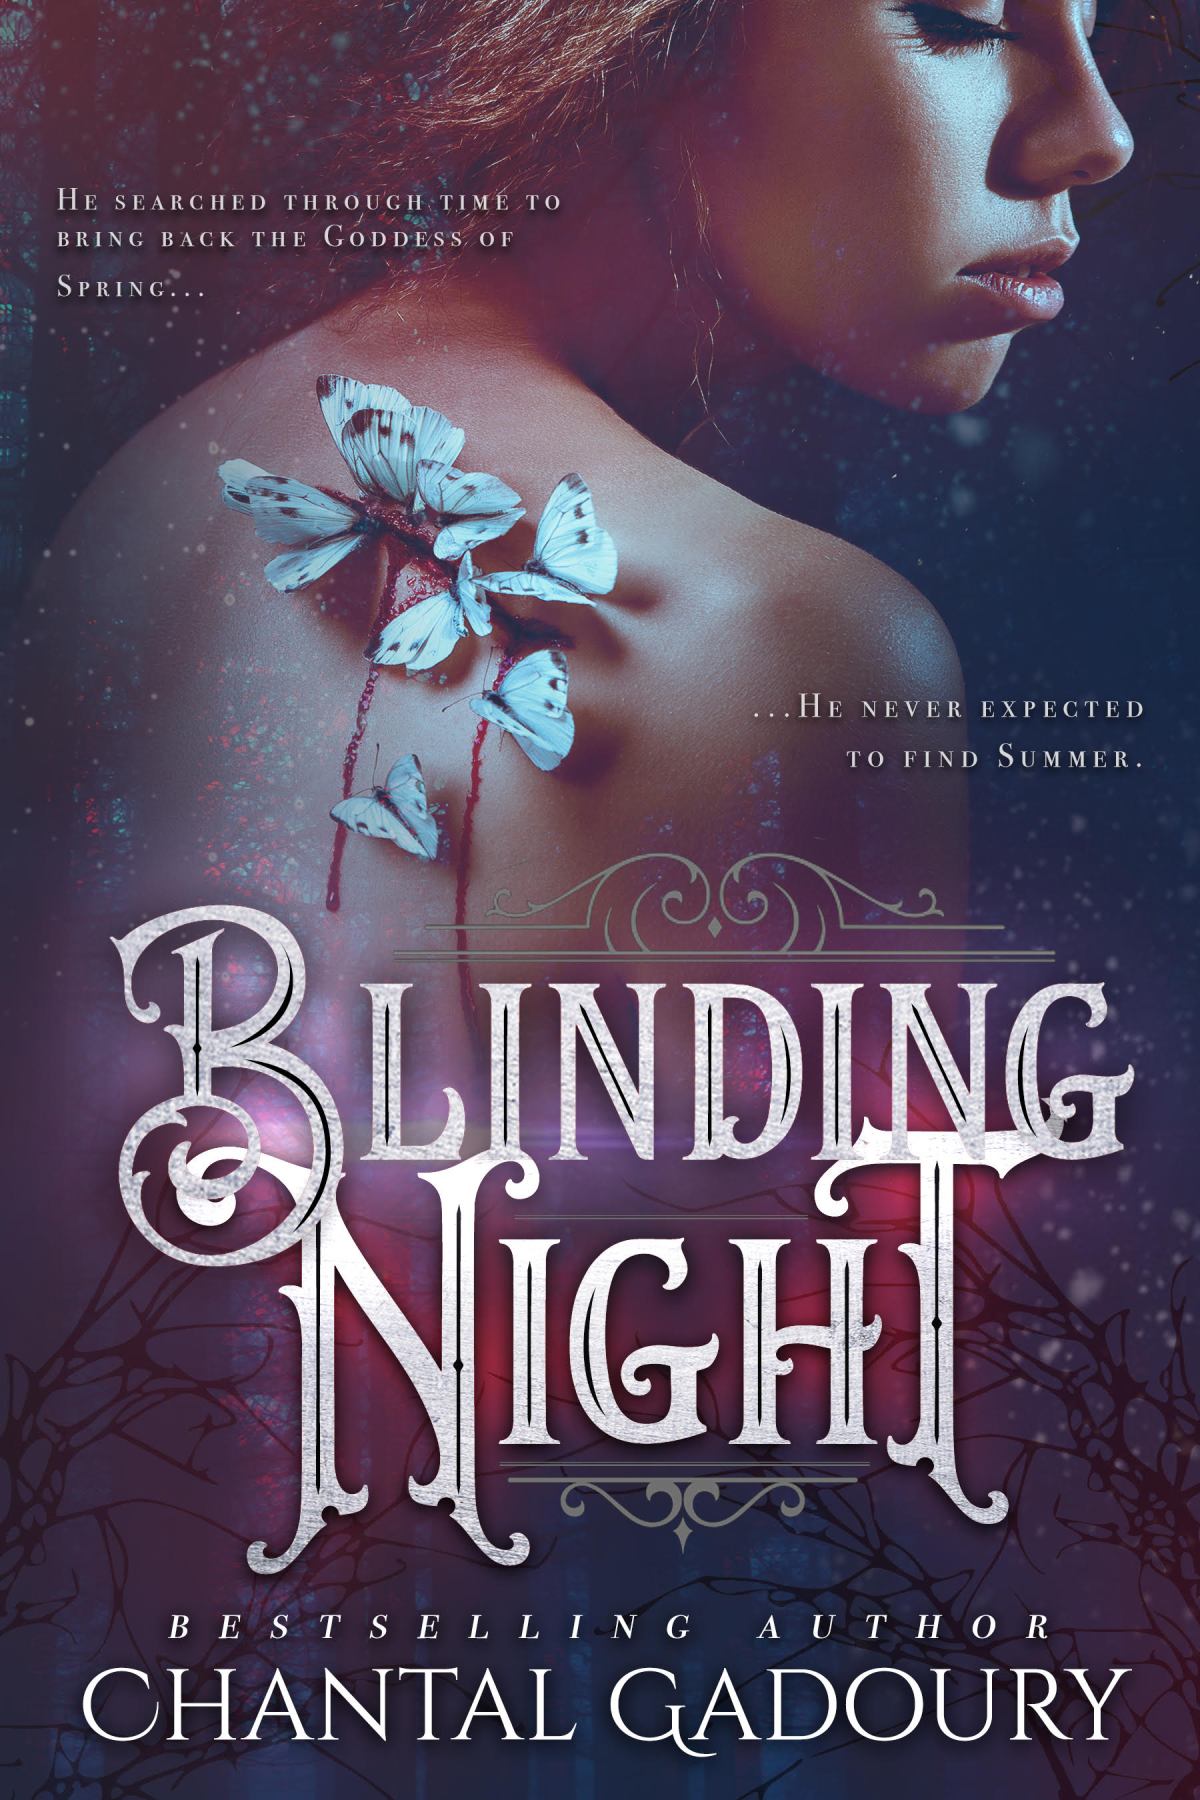 Blinding Night – Review